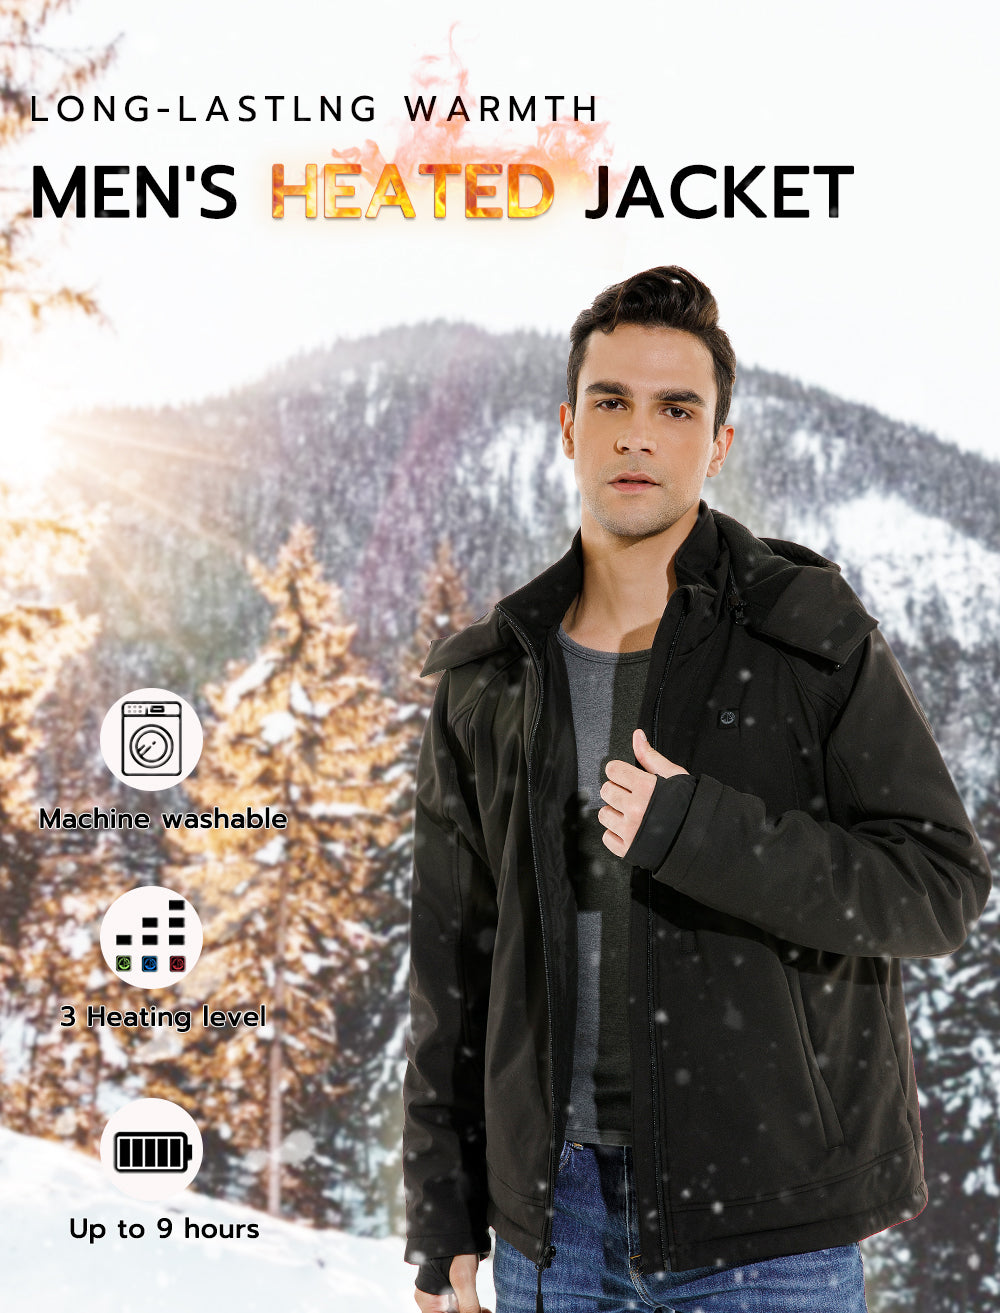 Sailwind Men's Soft Shell Heated Jacket with Detachable Hood and Battery Pack